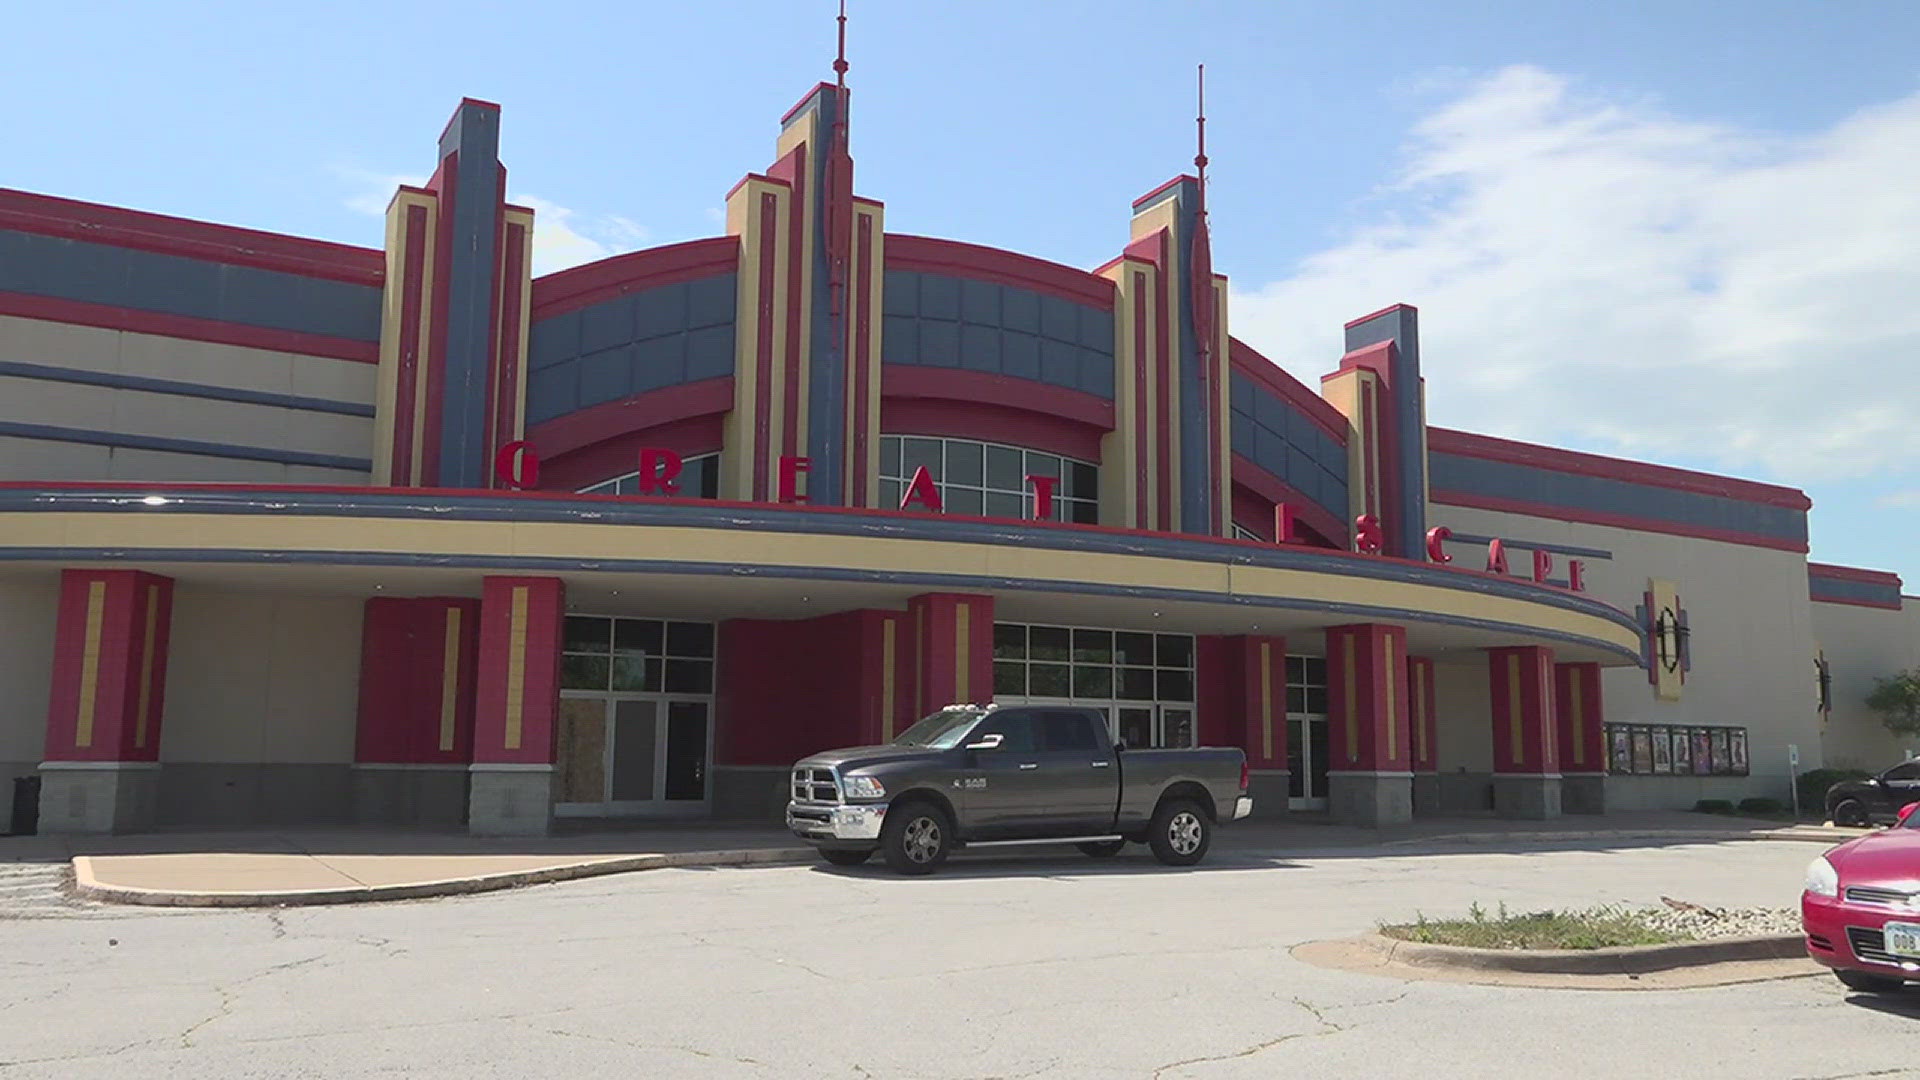 After nearly a year without a movie theater on the Illinois side of the Quad Cities, the former Regal Moline Cinema is reopening this July with a new name.